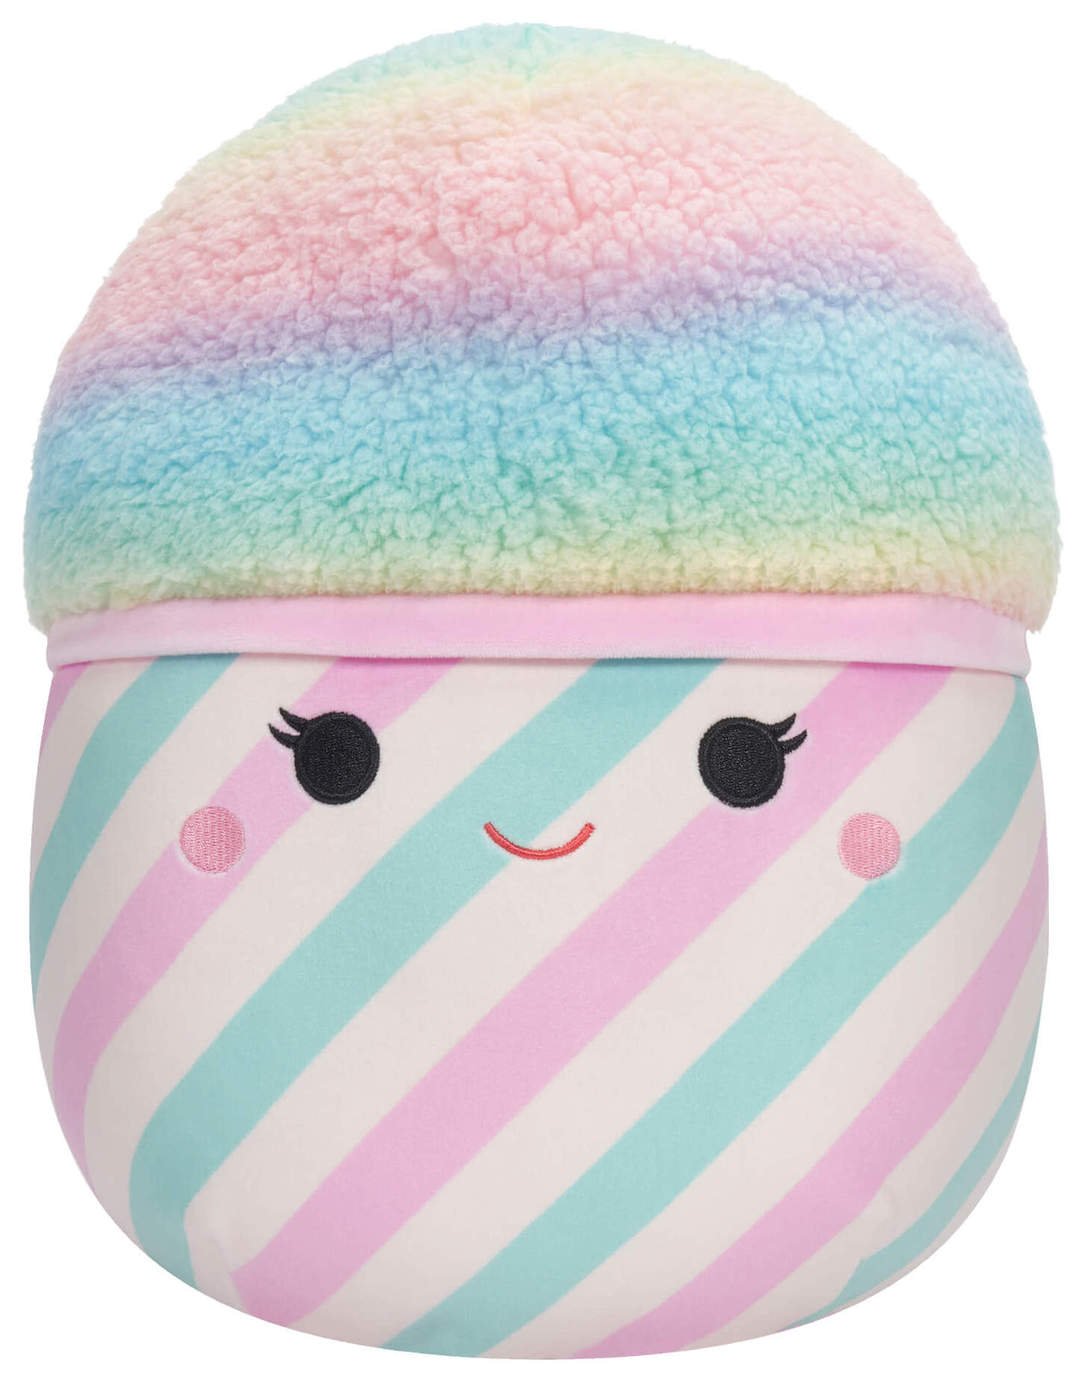 Original Squishmallows 12-inch - Bevin Pink and Blue